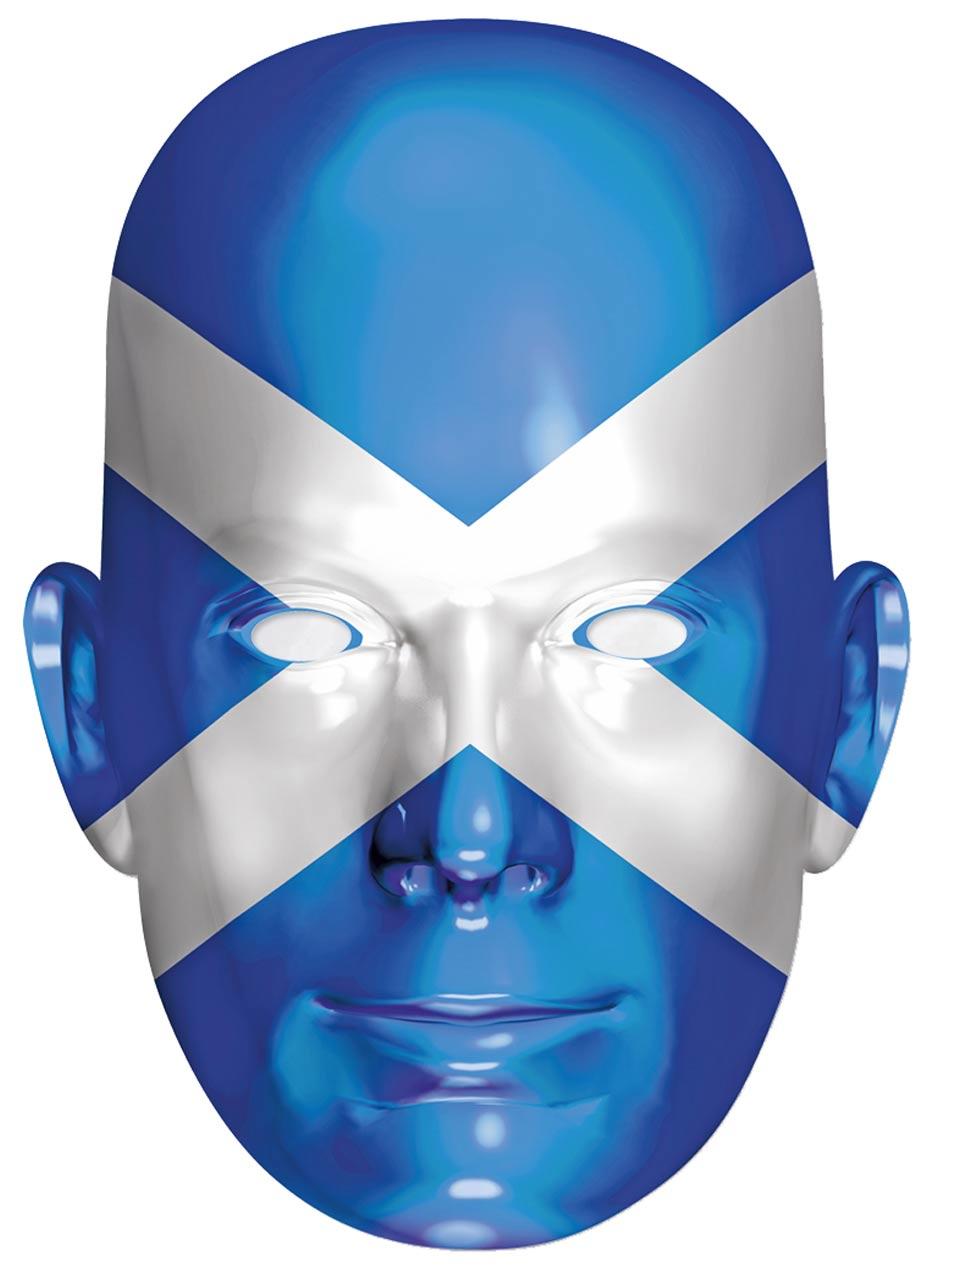 Scotland Flag Card Mask by Mask-erade SCOTL01 available from a collection of national country face masks here at Karnival Costumes online party shop